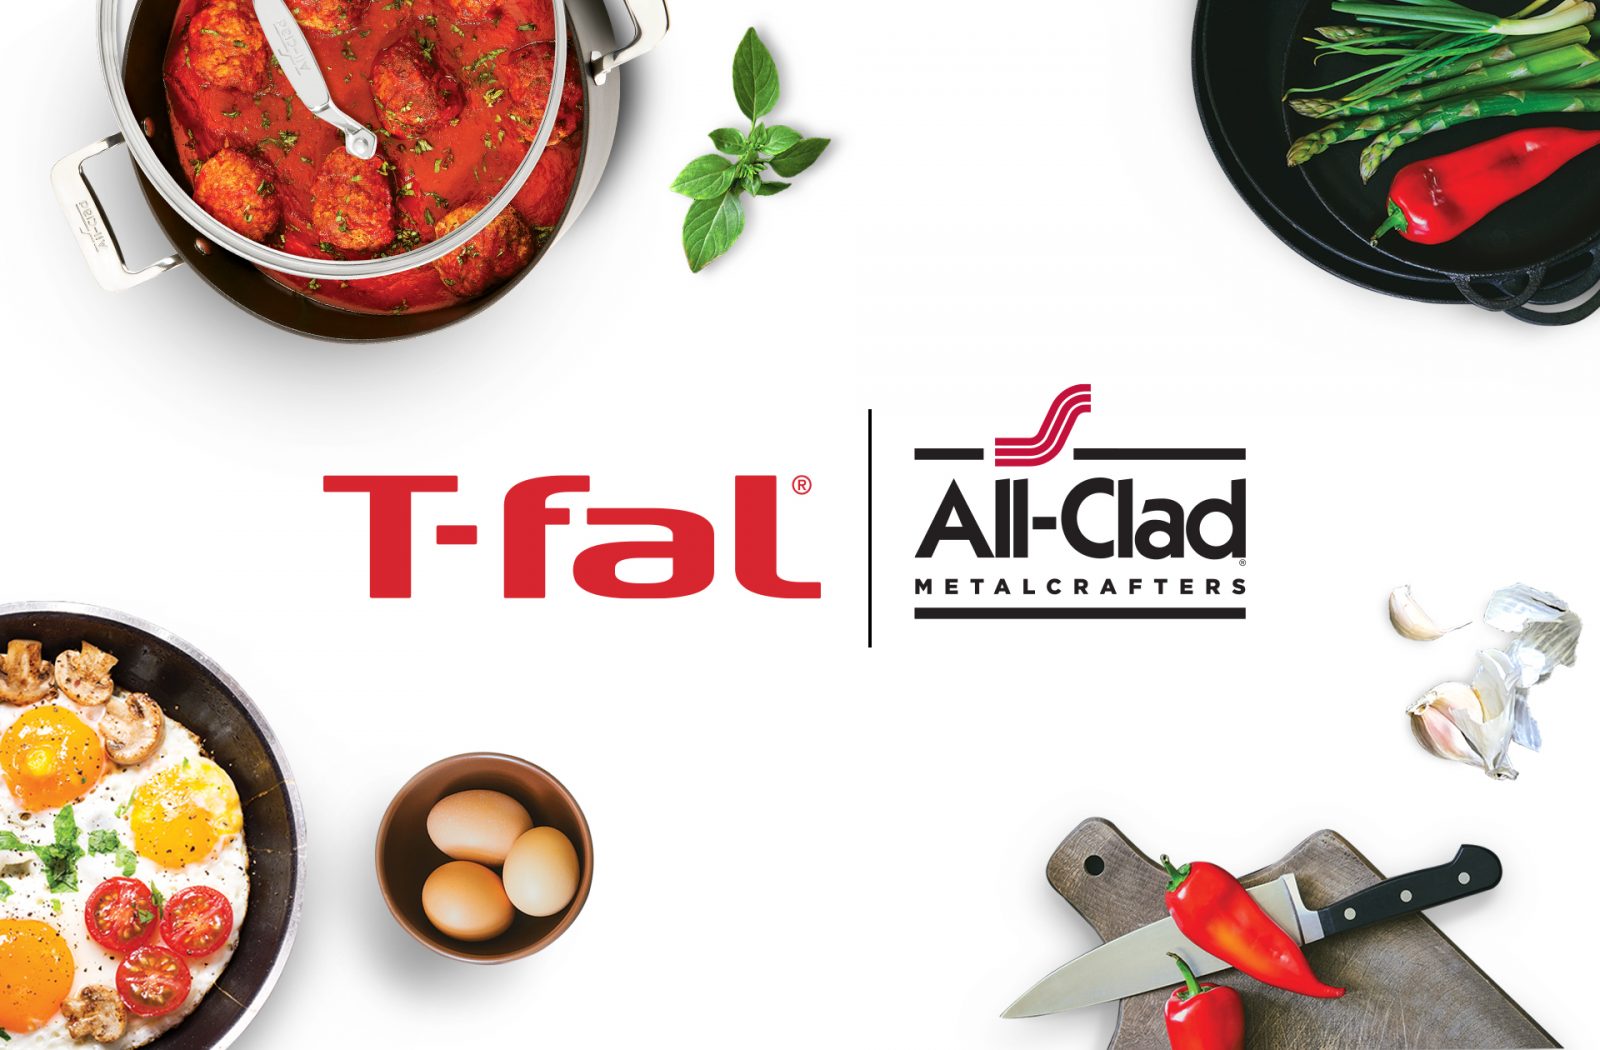 Header image of the T-fal and All-Clad brand logos surrounded by food and cooking gear.